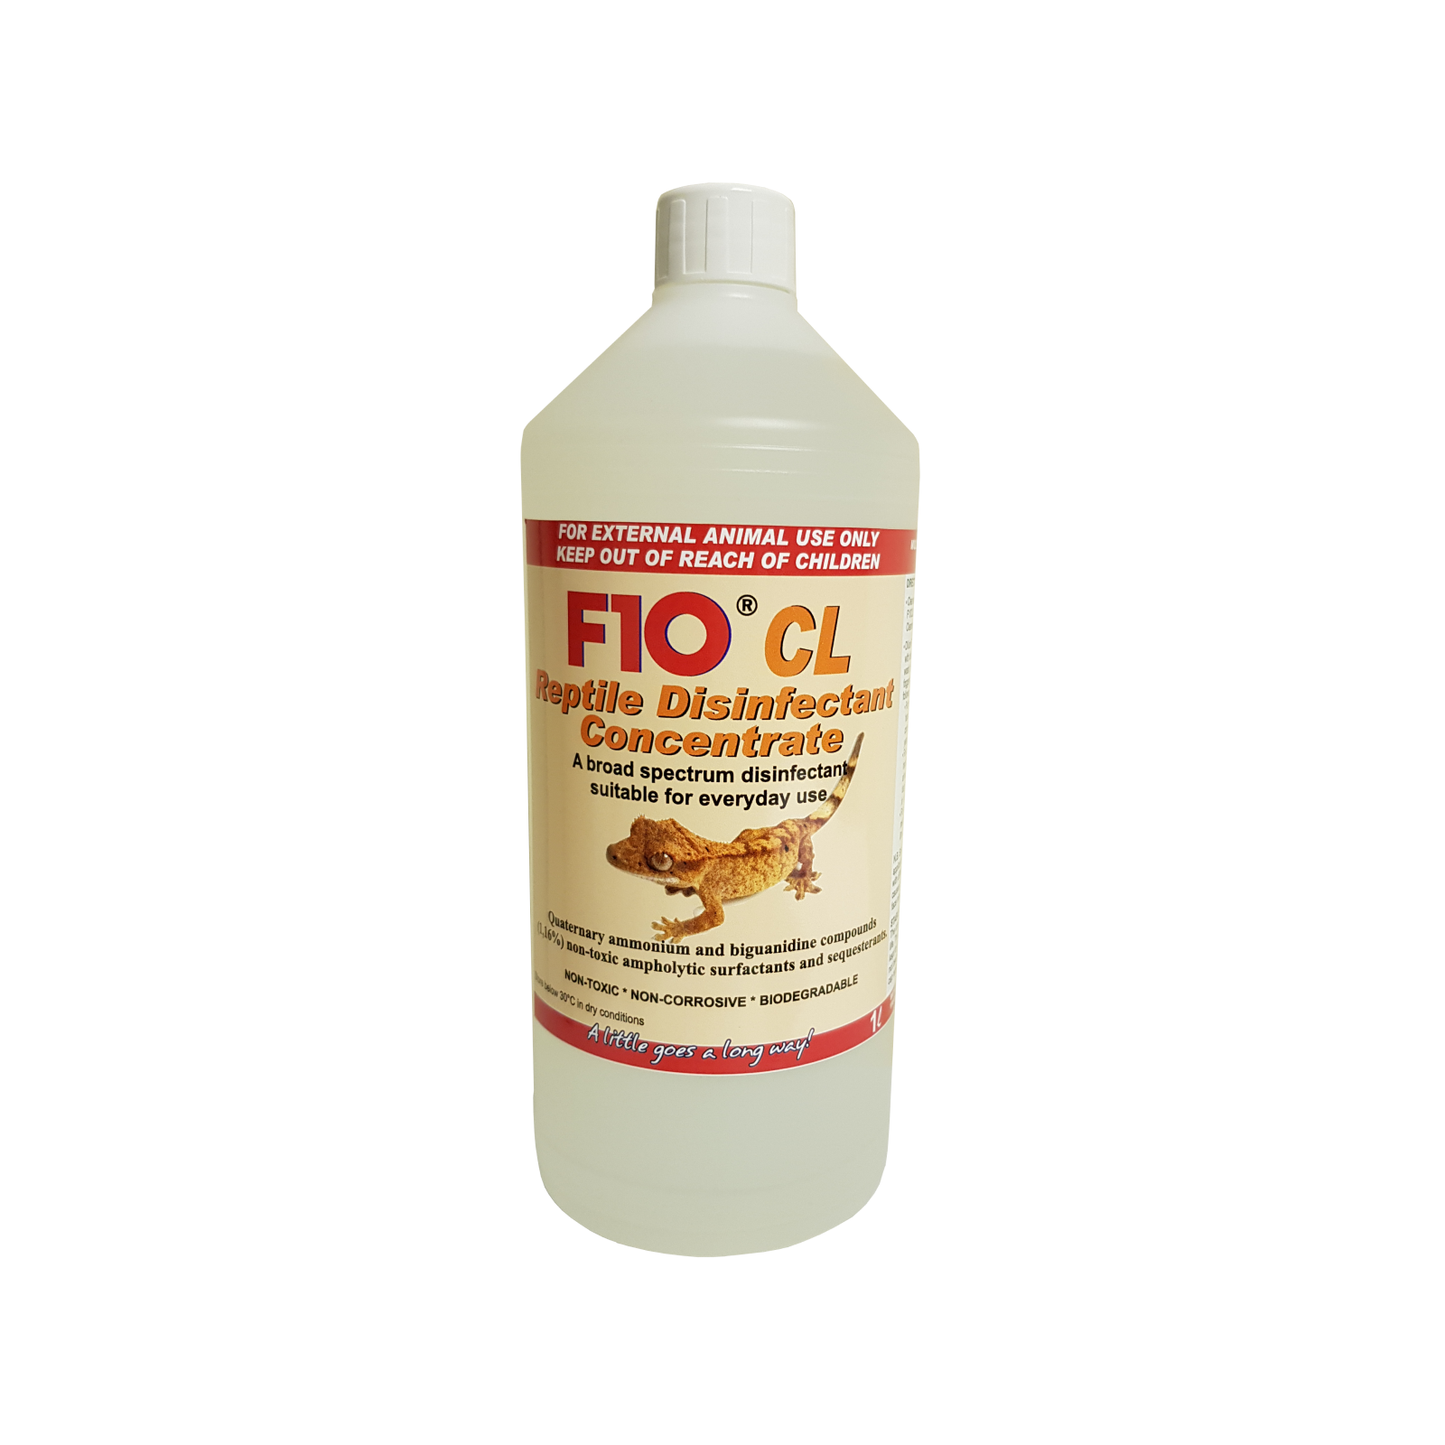 A 1 litre bottle of F10CL Reptile Disinfectant Concentrate